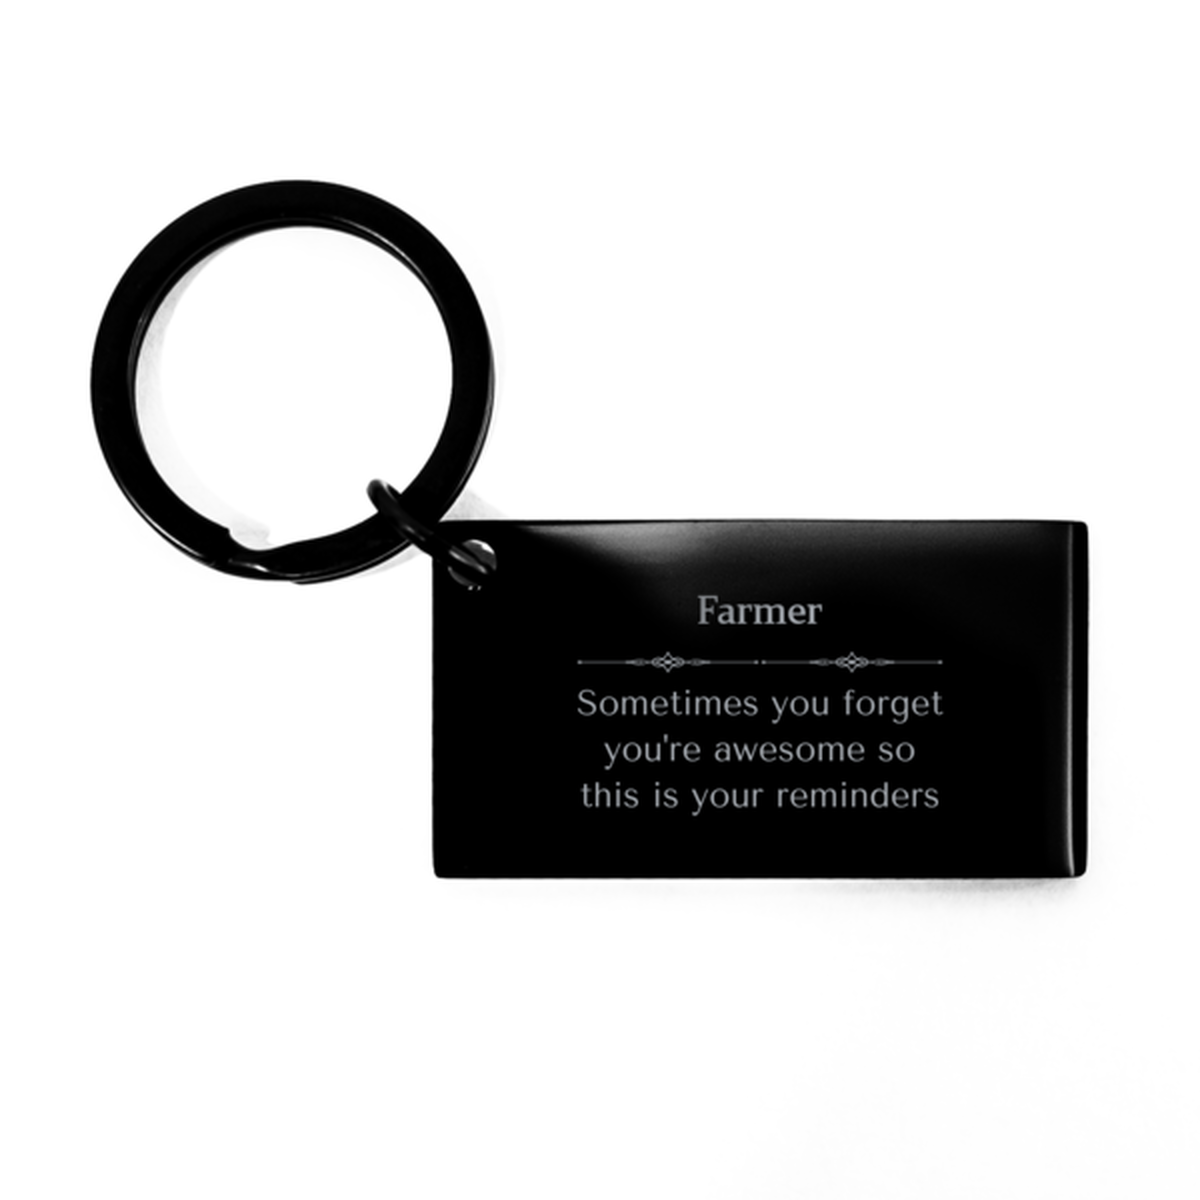 Sentimental Farmer Keychain, Landscape Designer Sometimes you forget you're awesome so this is your reminders, Graduation Christmas Birthday Gifts for Farmer, Men, Women, Coworkers